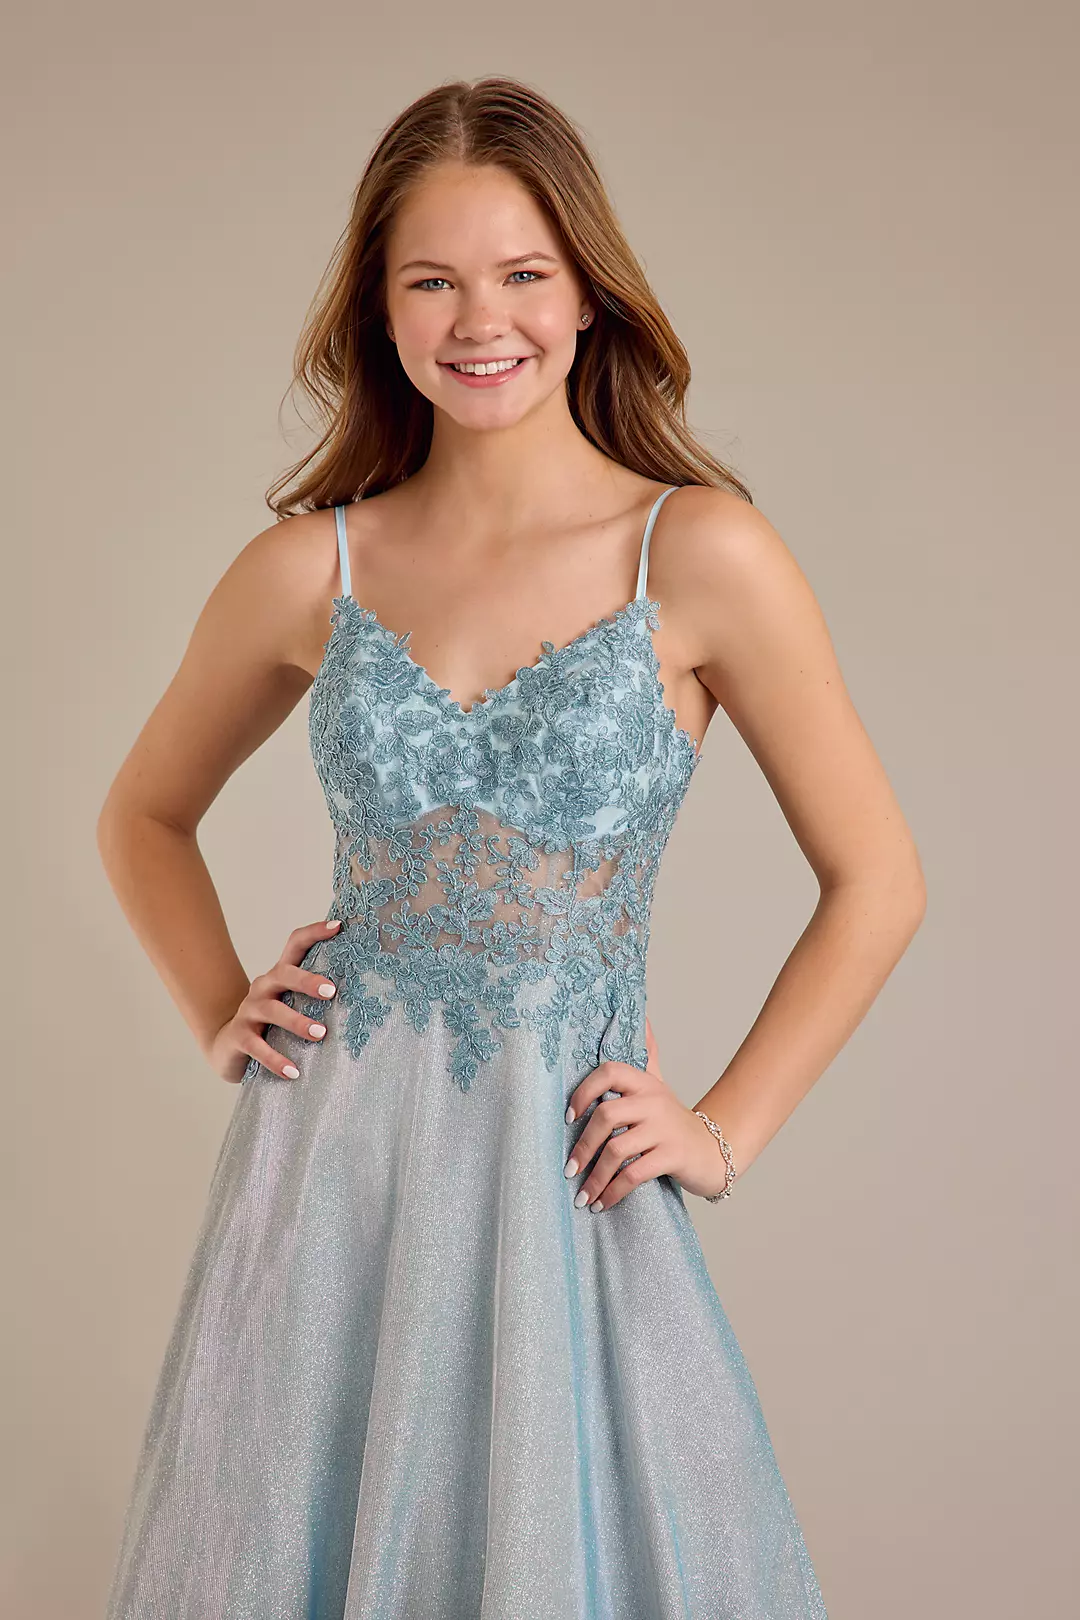 Iridescent Ball Gown with Illusion Lace Applique Image 3